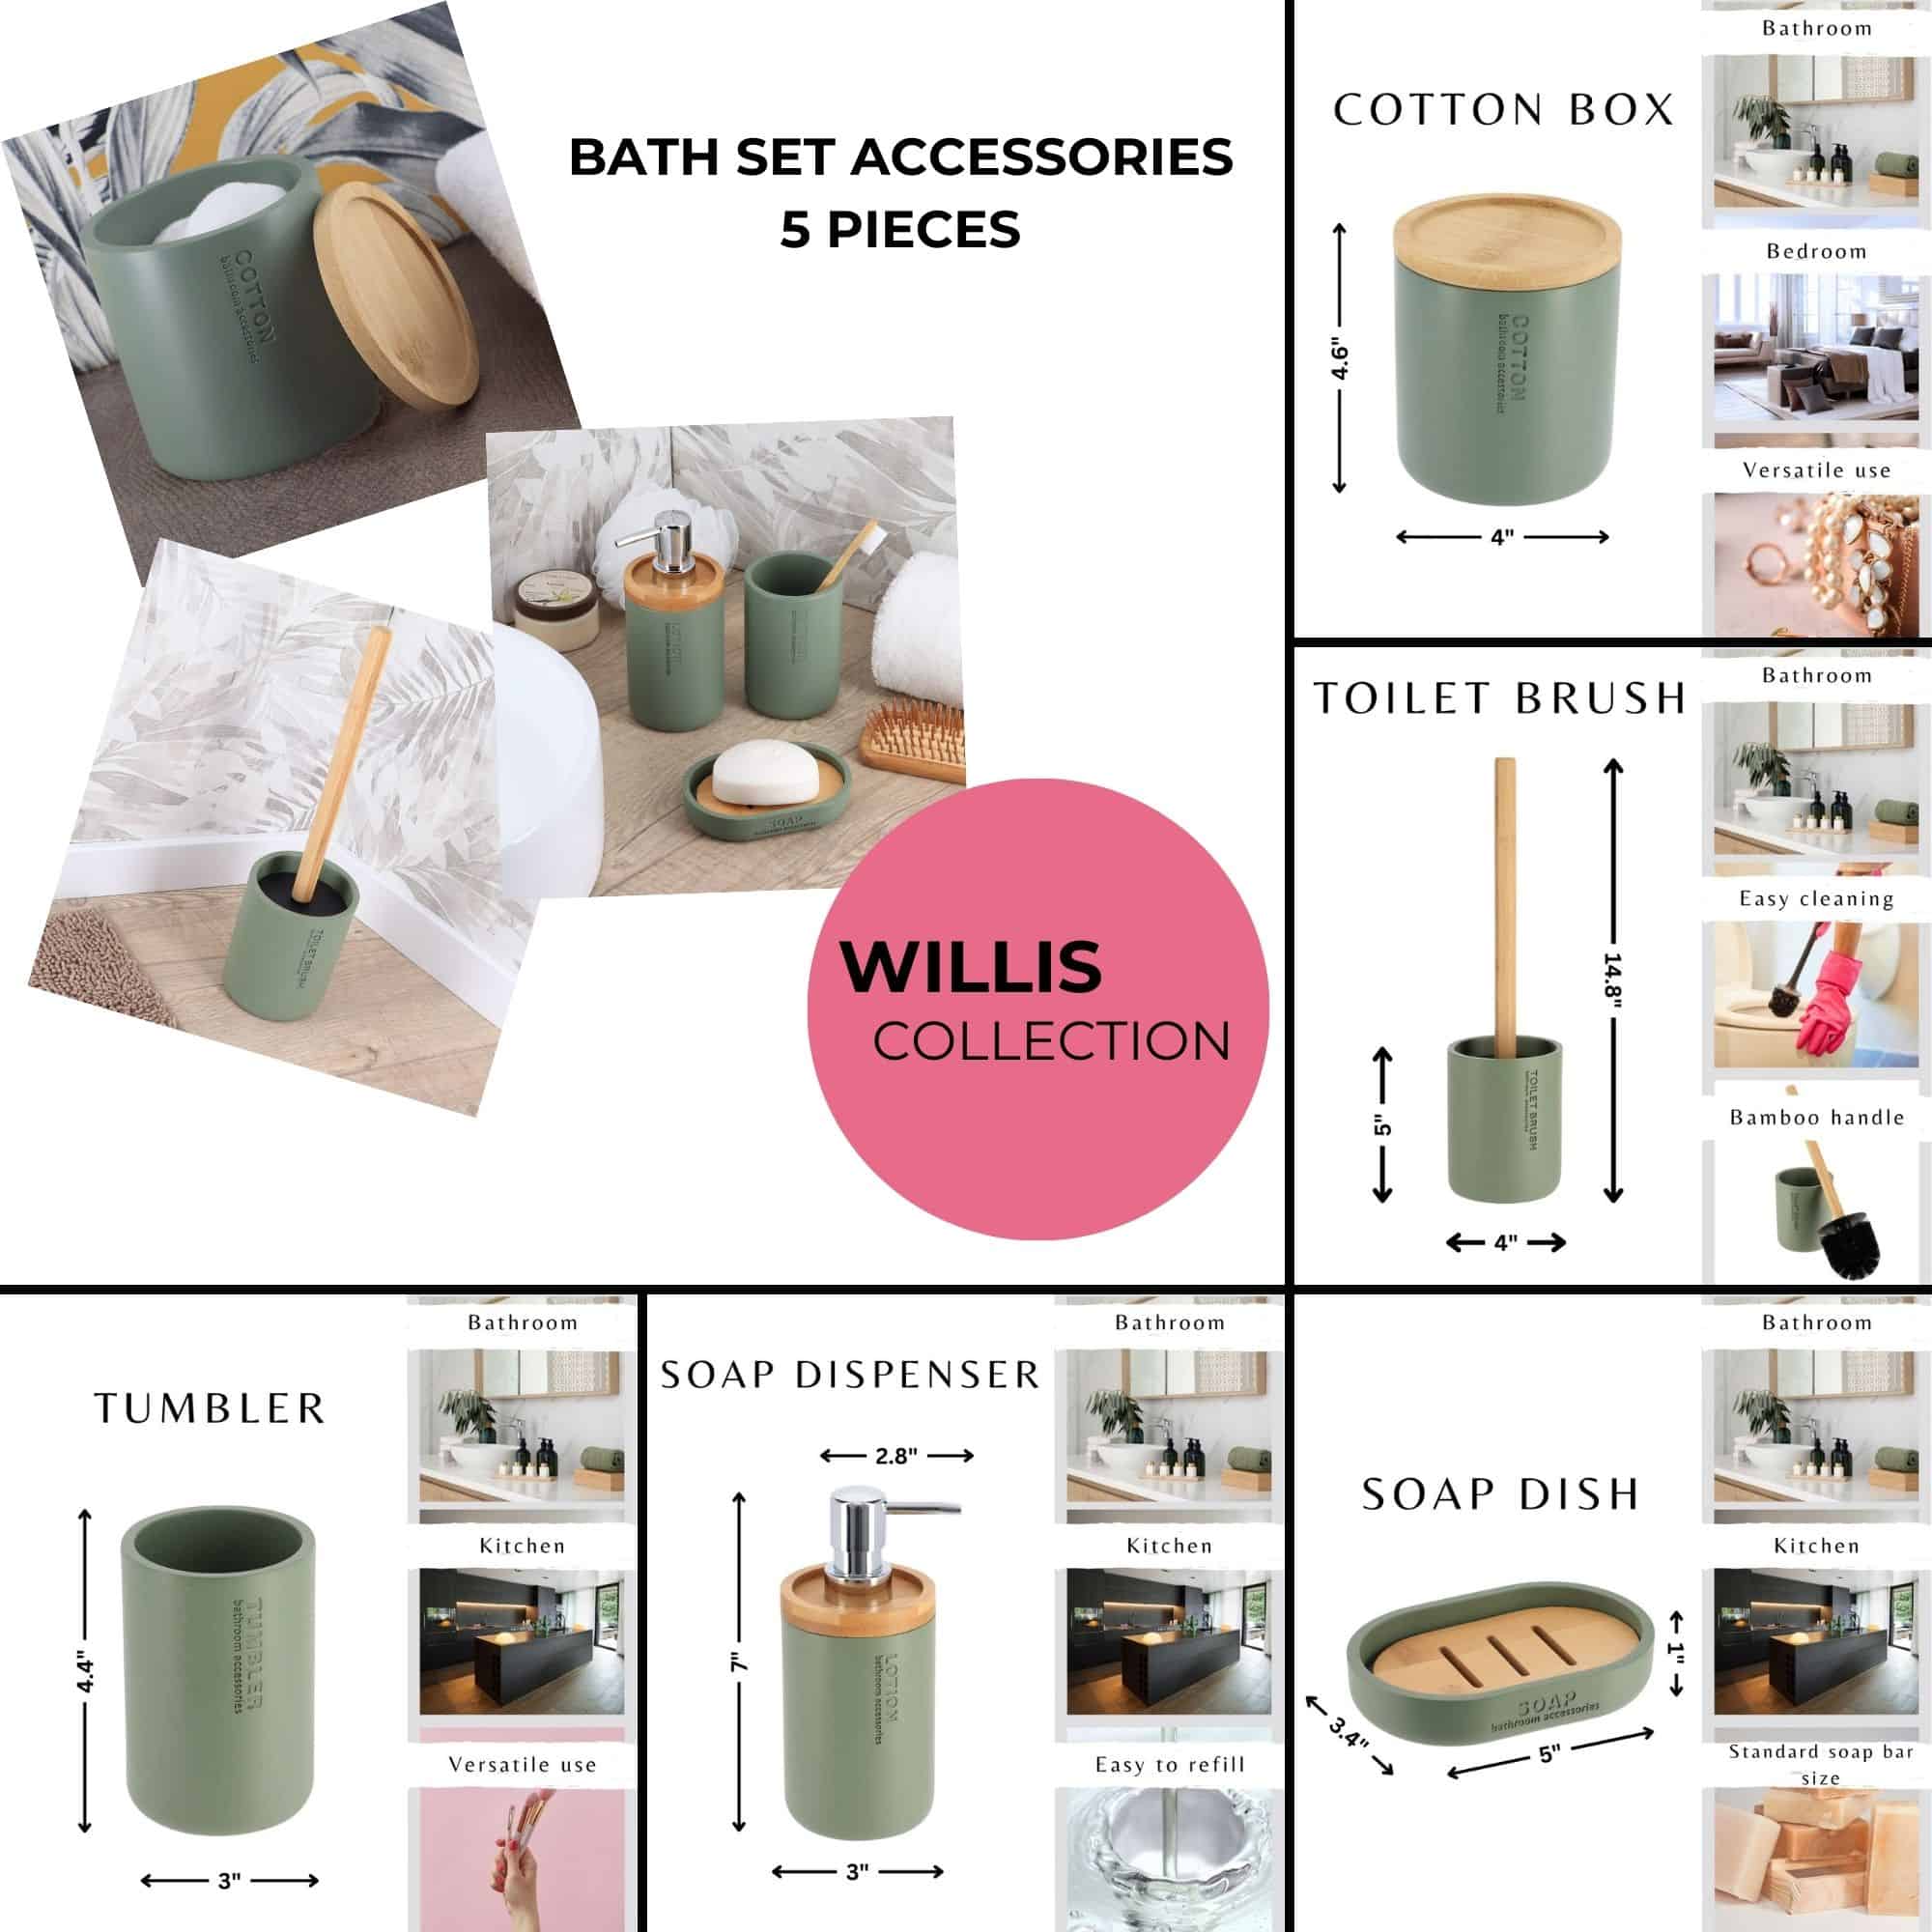 Complete collection bath set accessories 5 pieces for modern interior khaki green